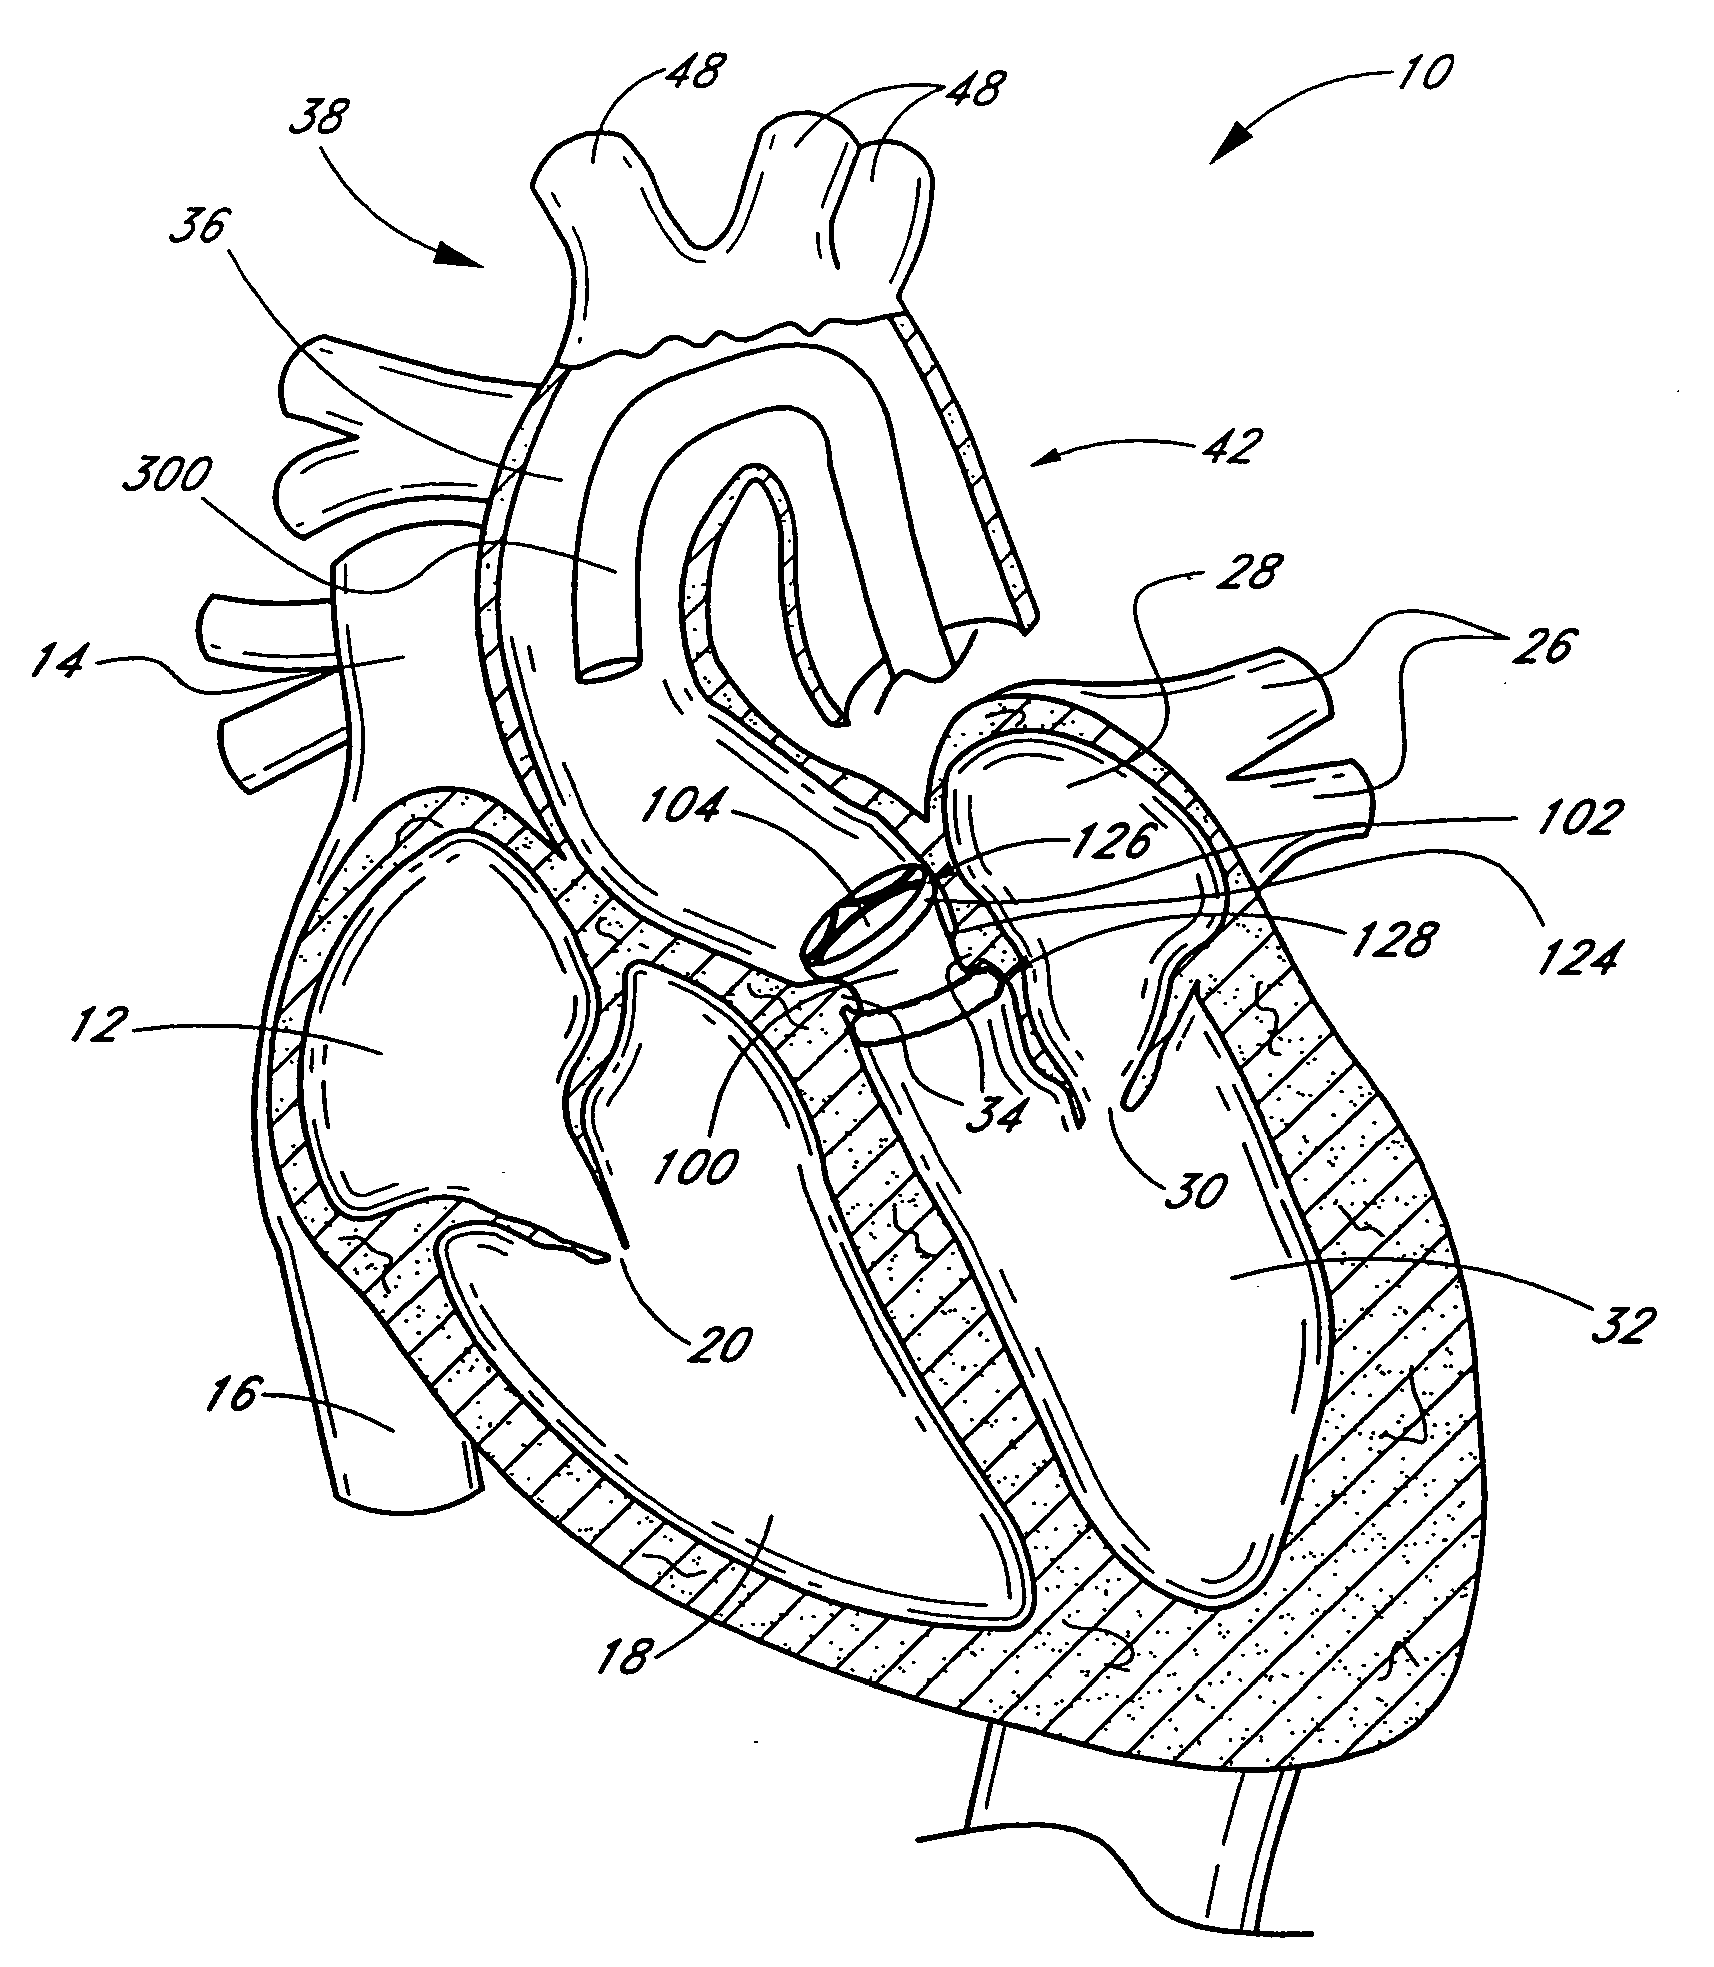 Nonstented heart valves with formed in situ support